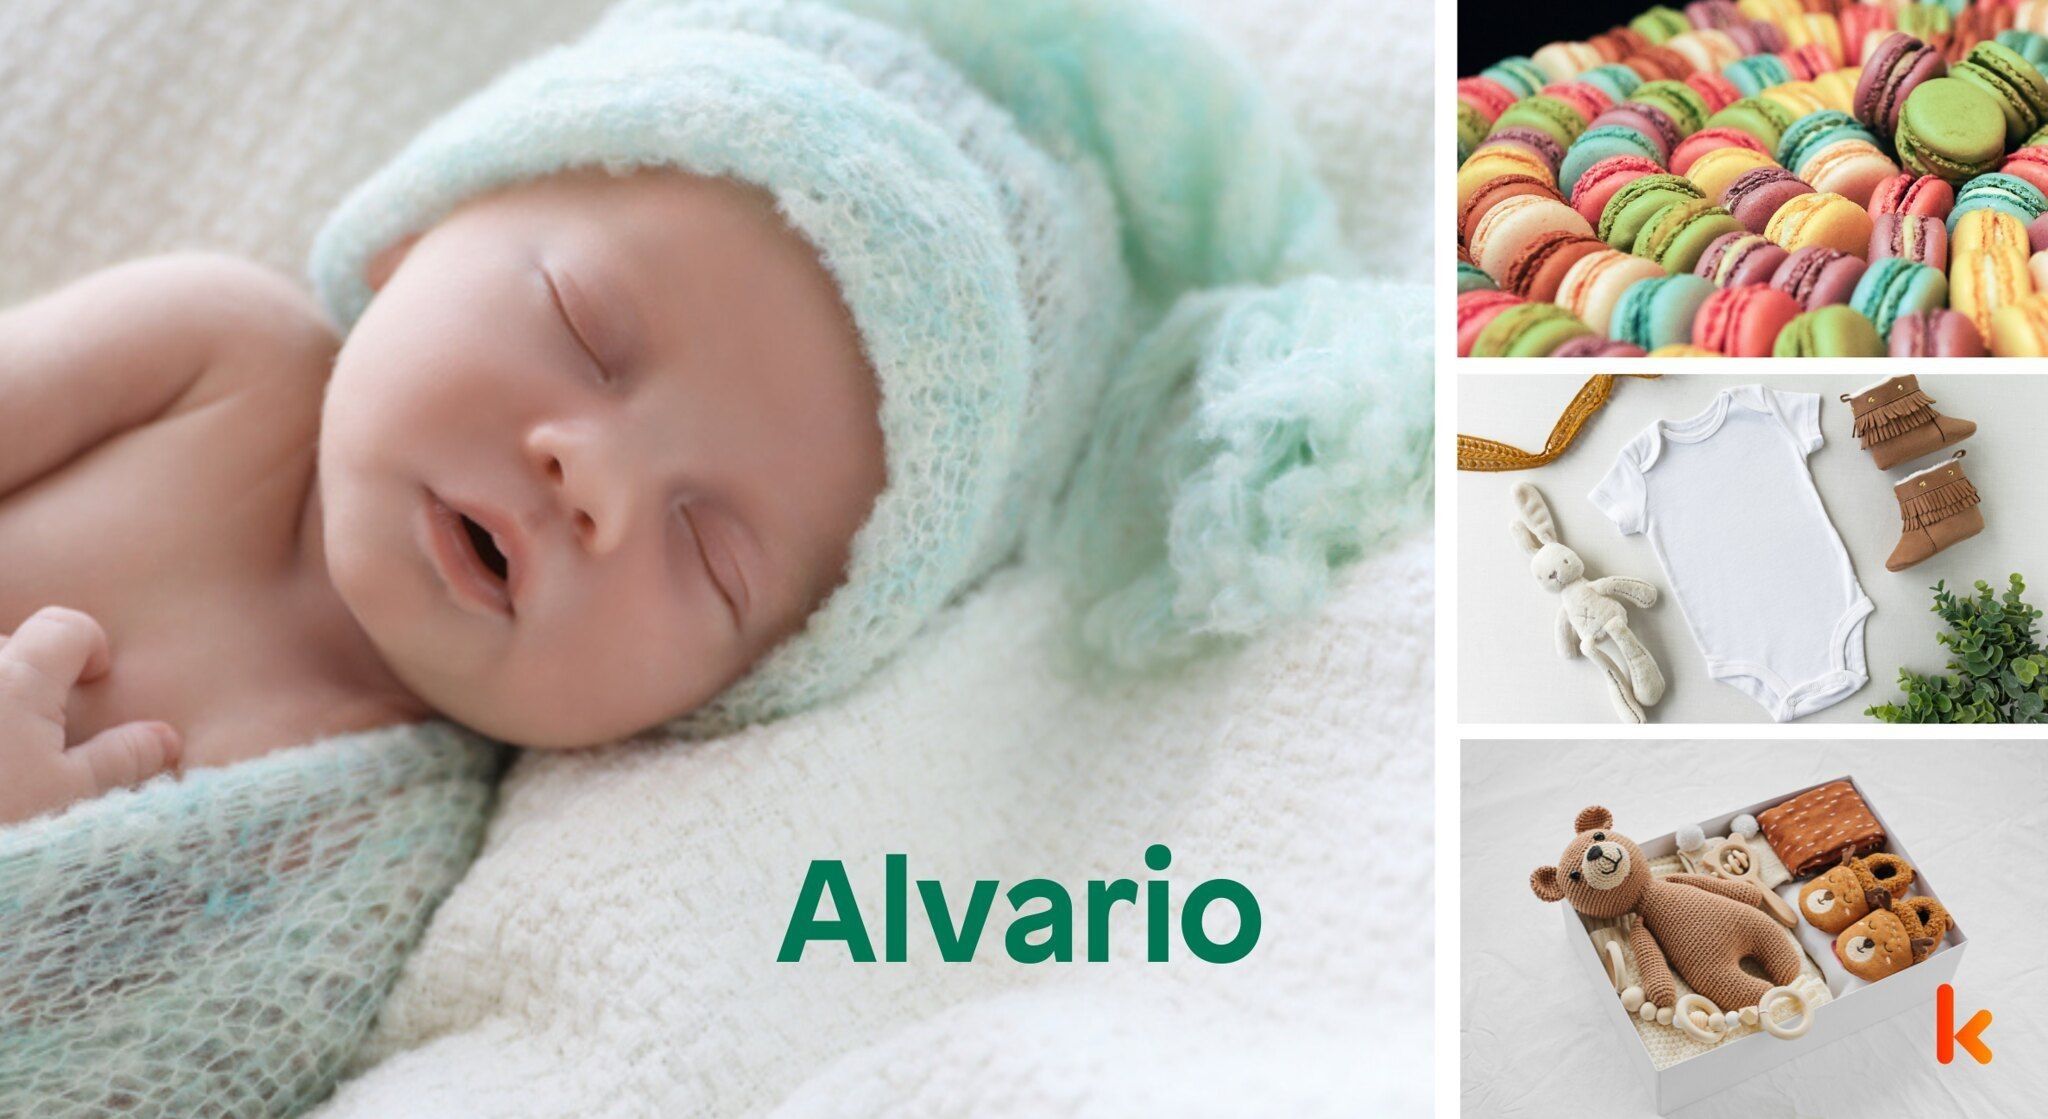 Meaning of the name Alvario